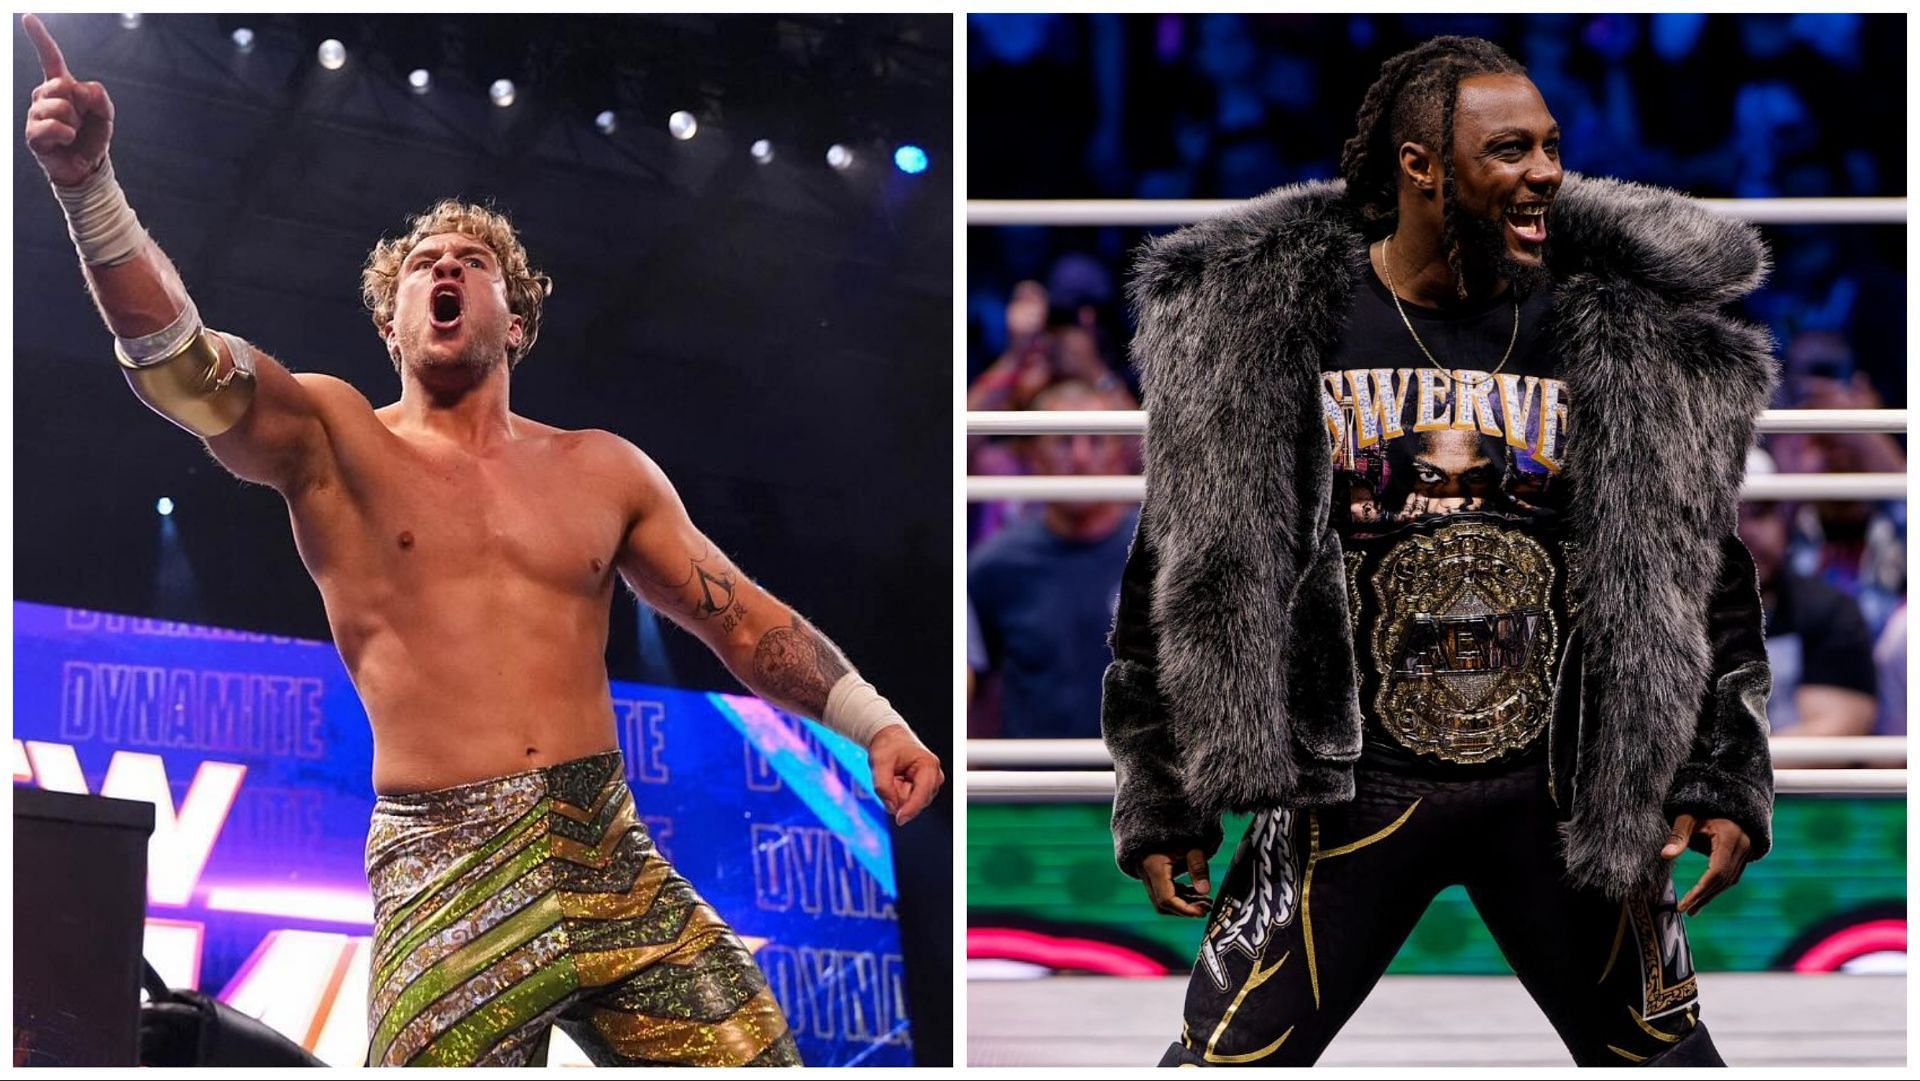 Will Ospreay and Swerve Strickland on AEW Dynamite